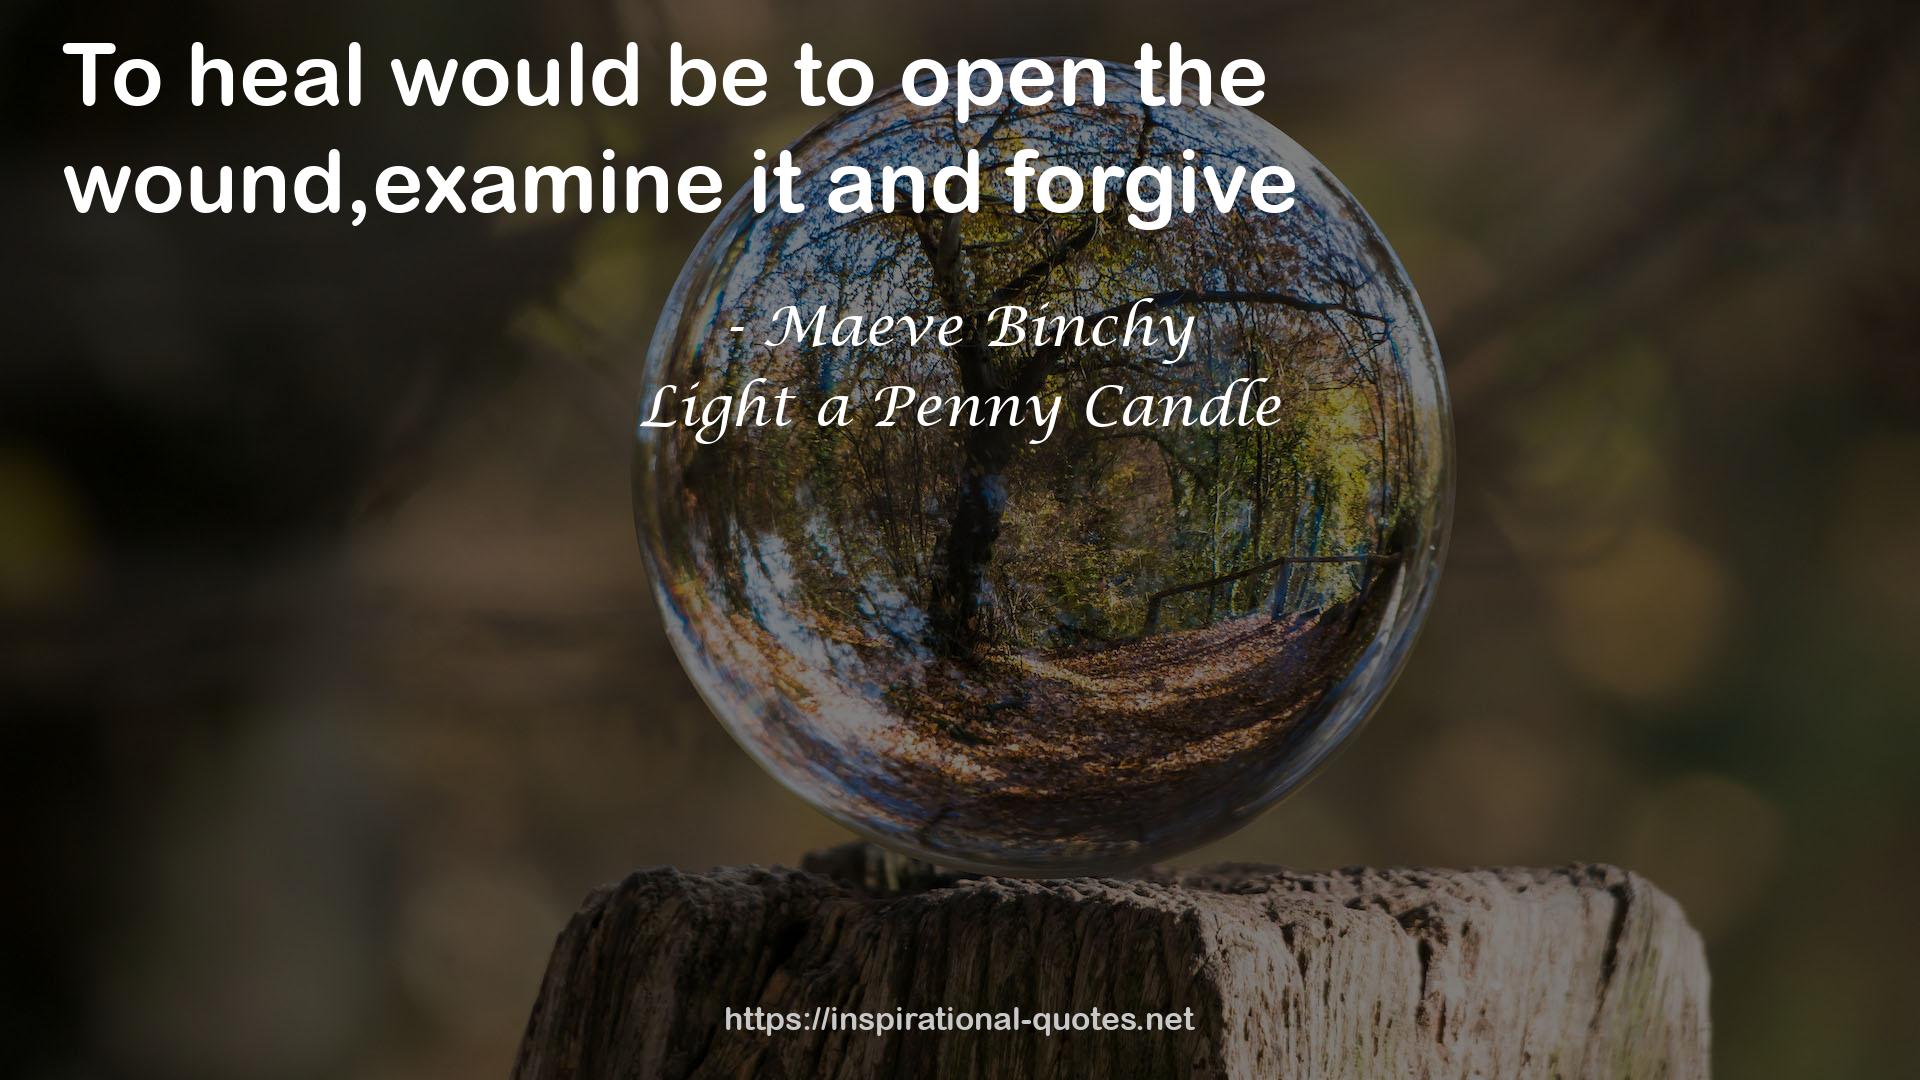 Light a Penny Candle QUOTES